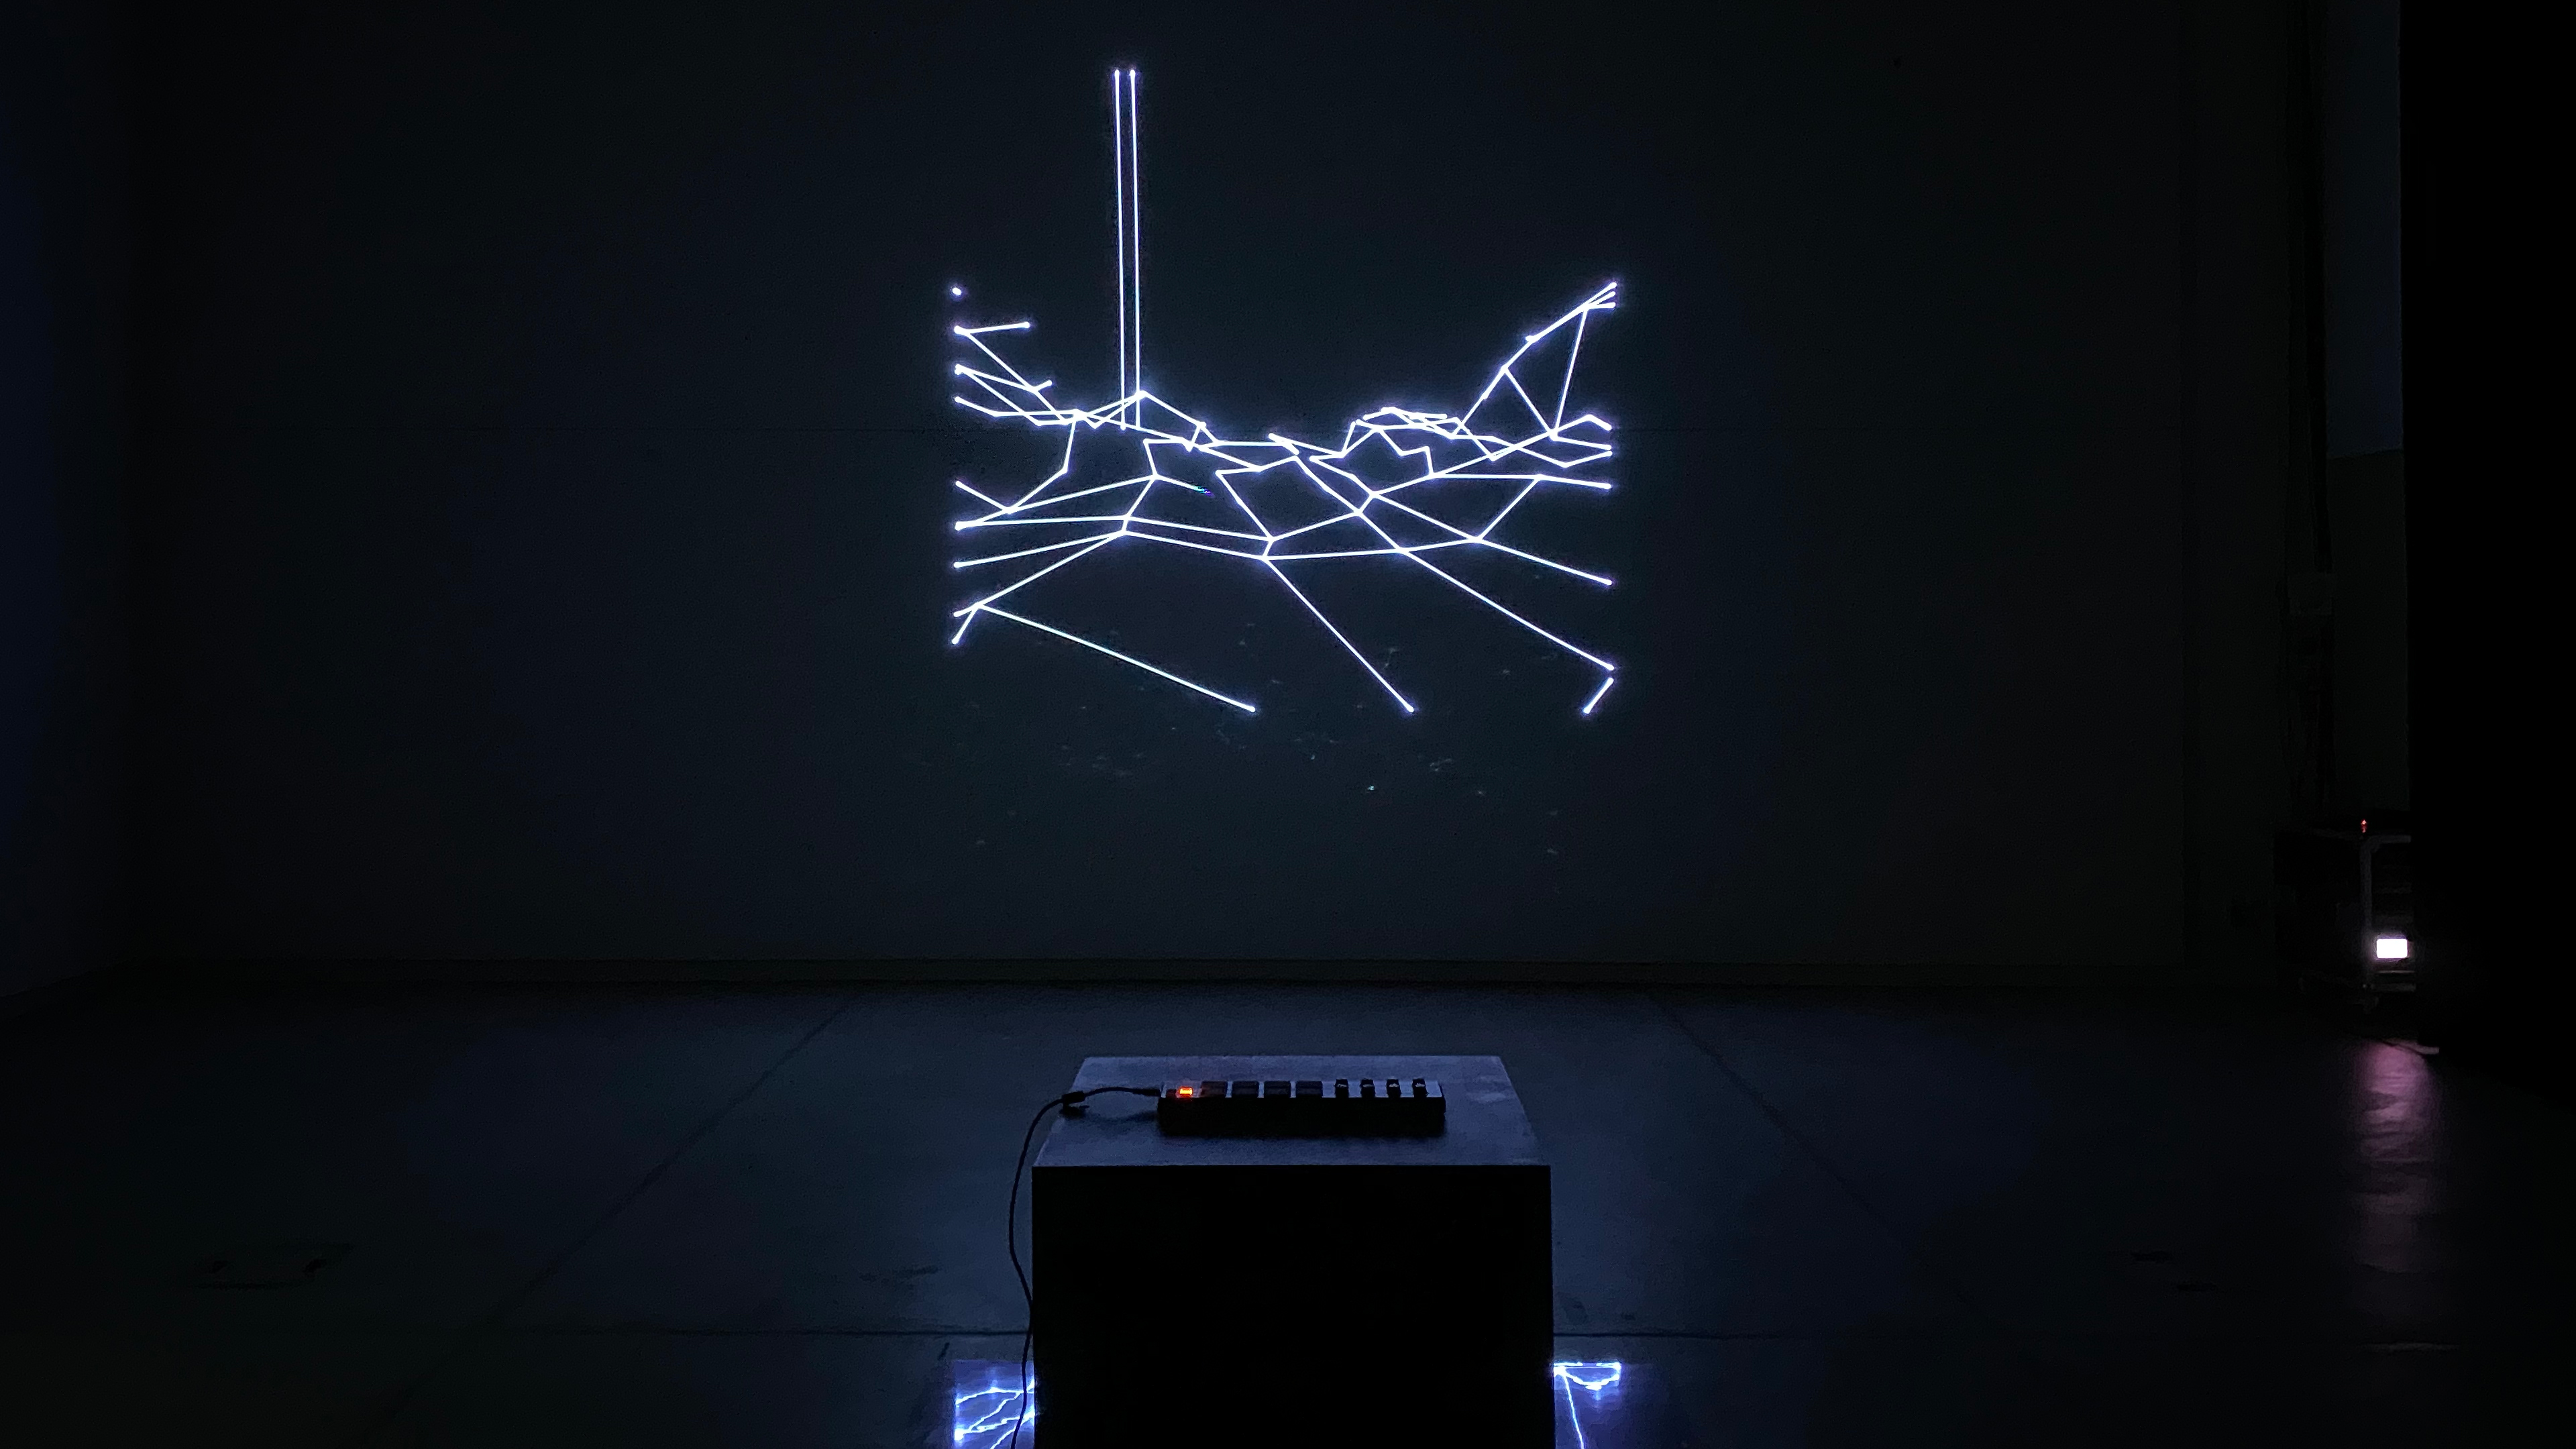 A laser projection onto a wall in a dark room. White lines showing an abstract landscape.